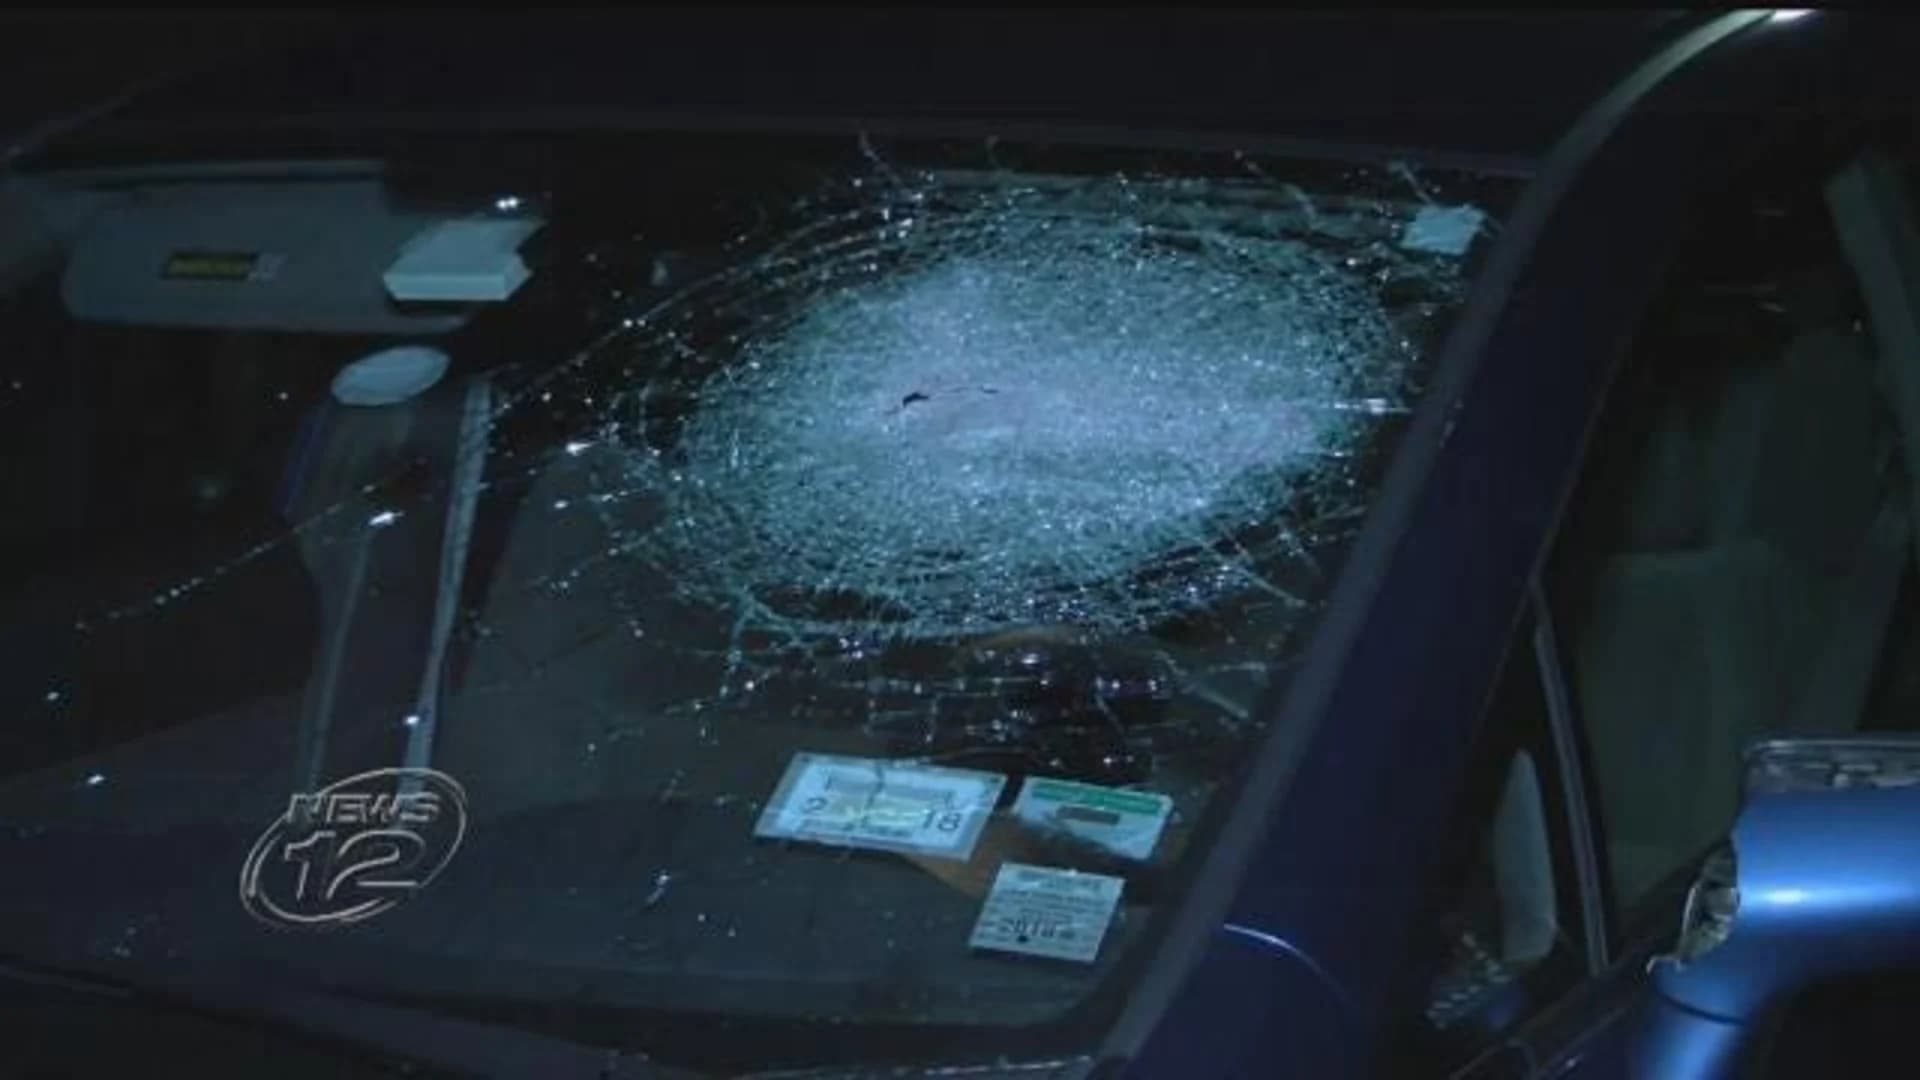 Police: Vehicle vandals smashed windows, mirrors in Suffolk